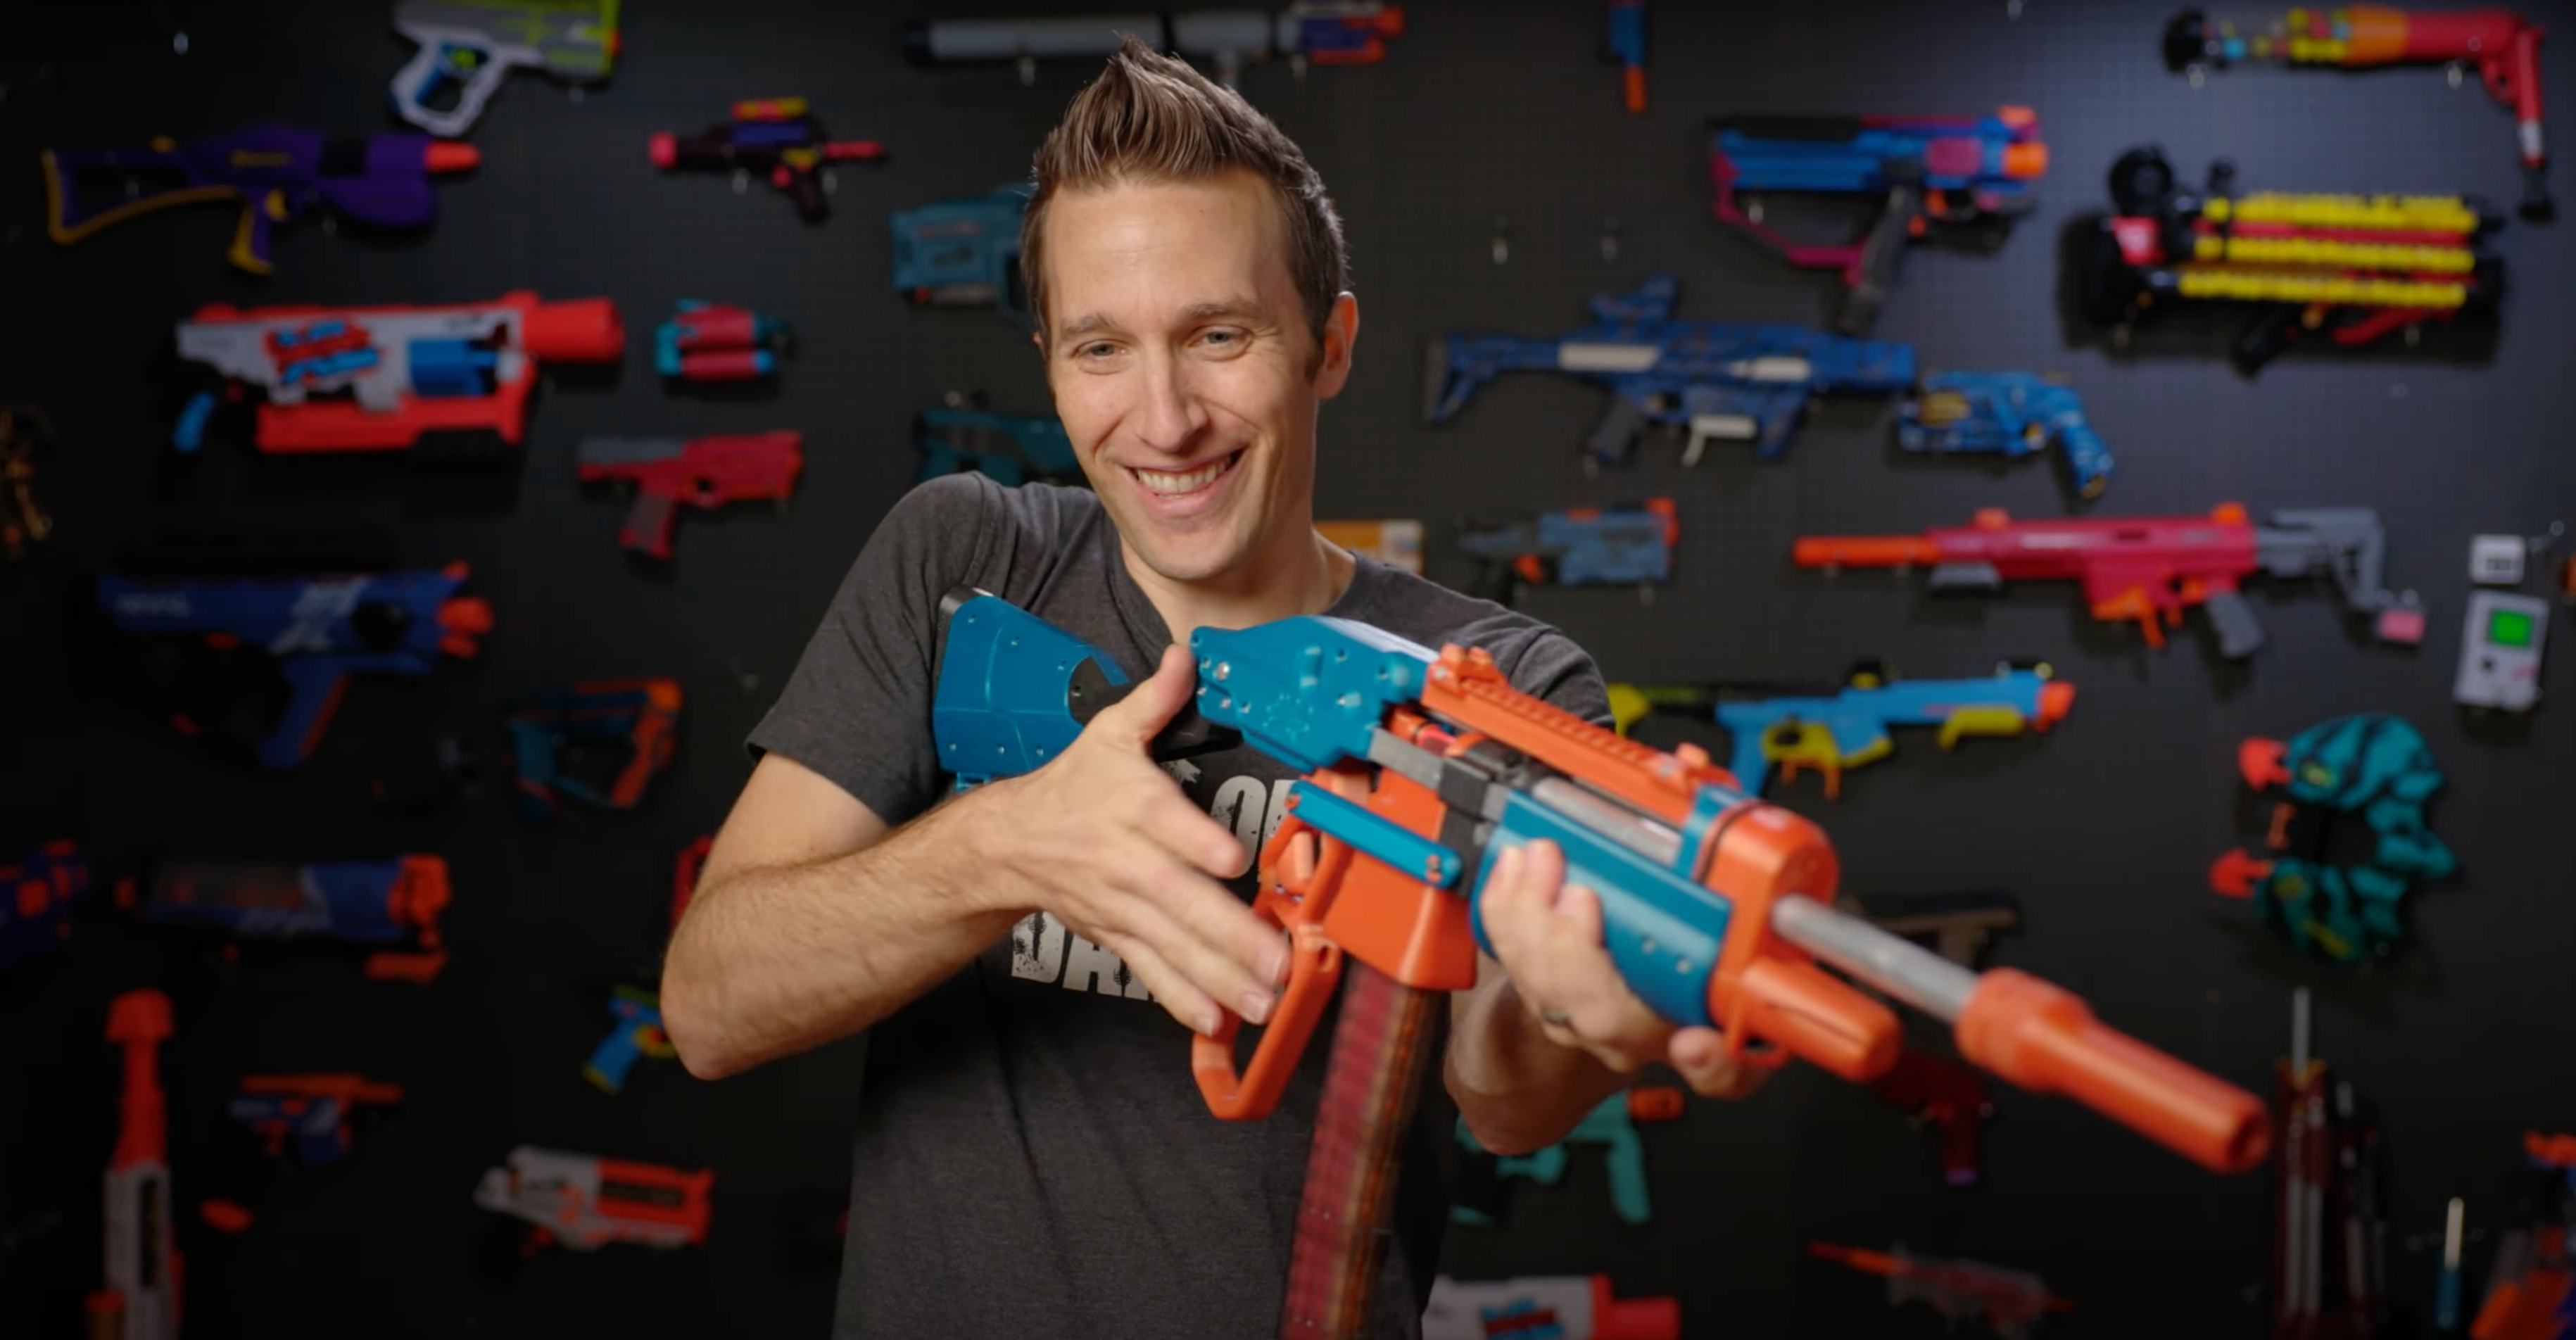 Load video: What is OUT OF DARTS and Nerf Modding?